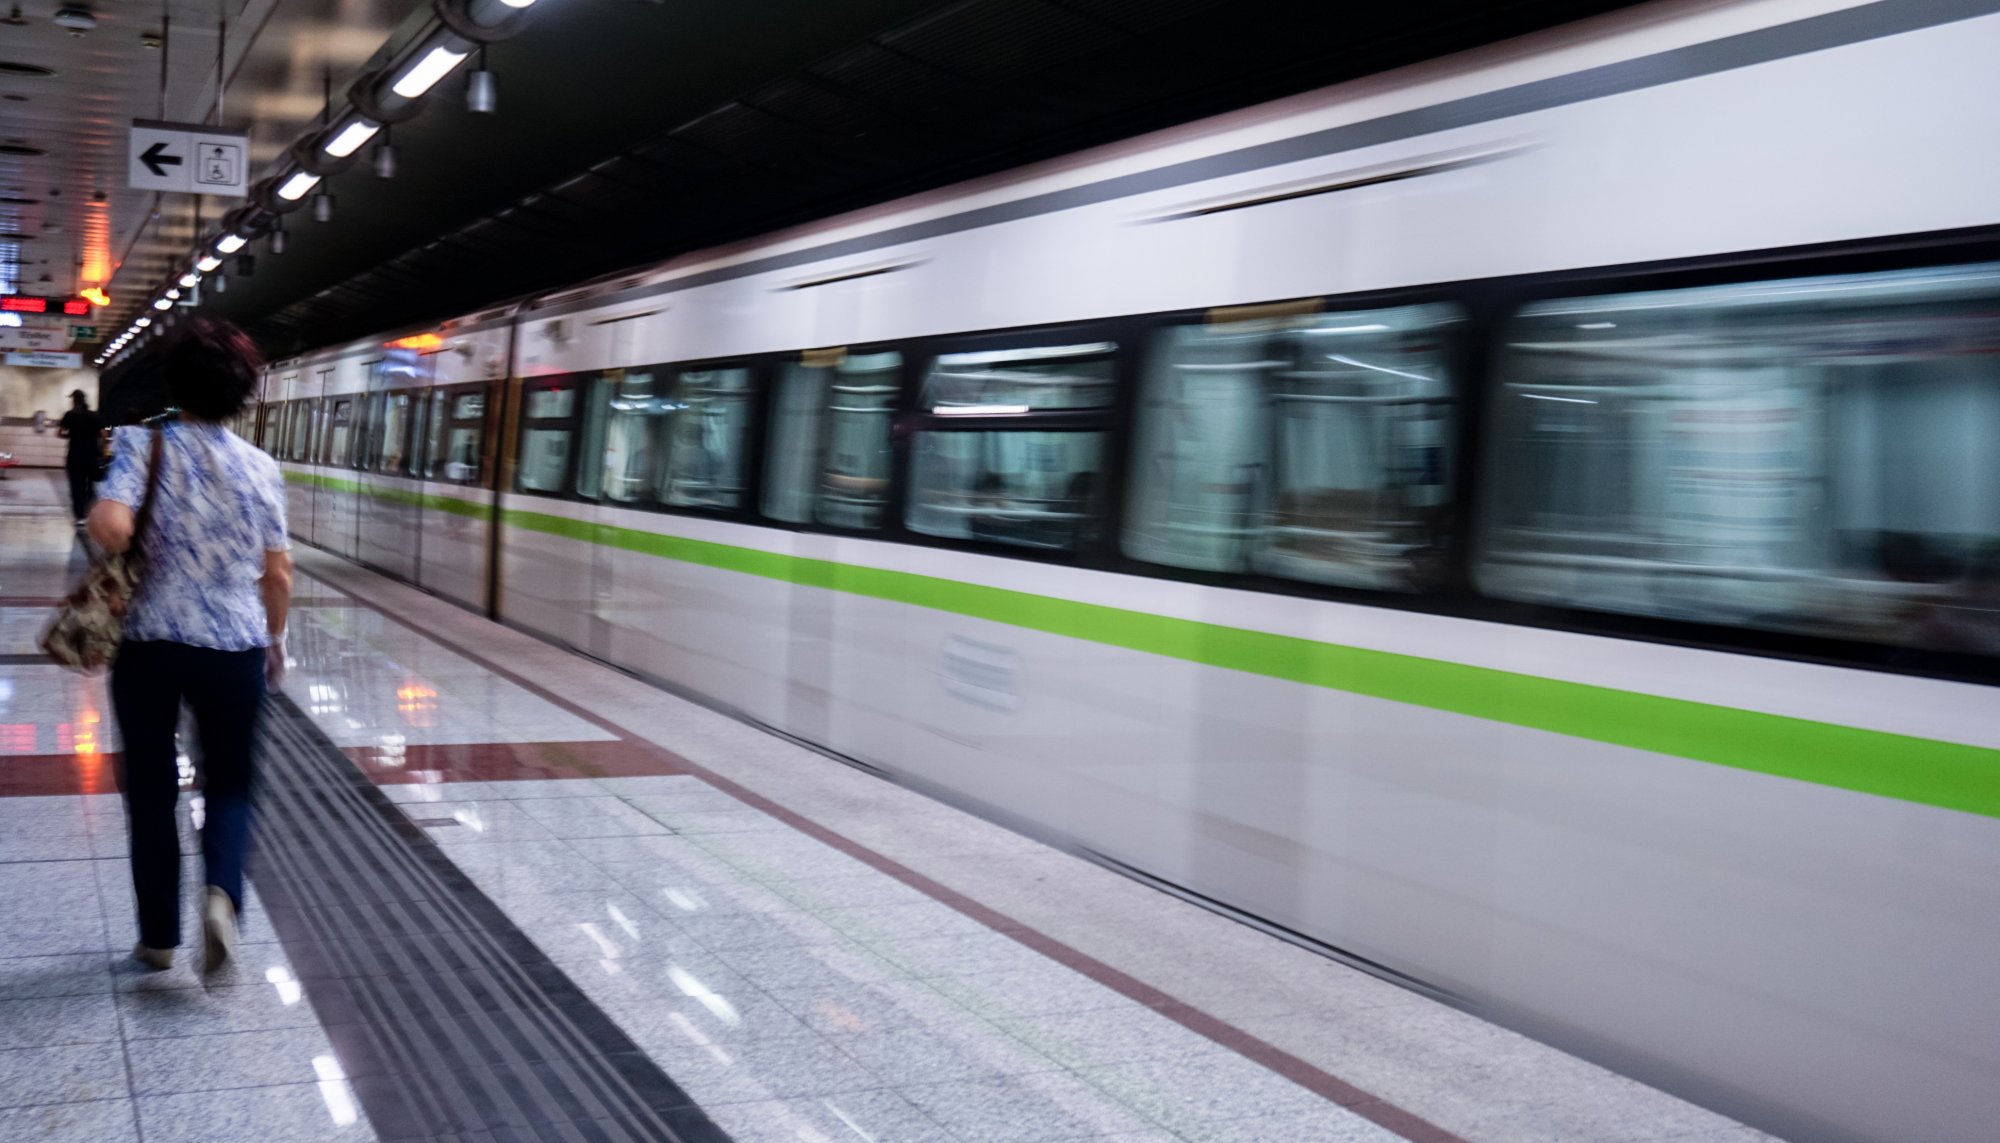 Ministry of Infrastructure and Transport Secures Funds for Revamp of Metro Line 1 Train